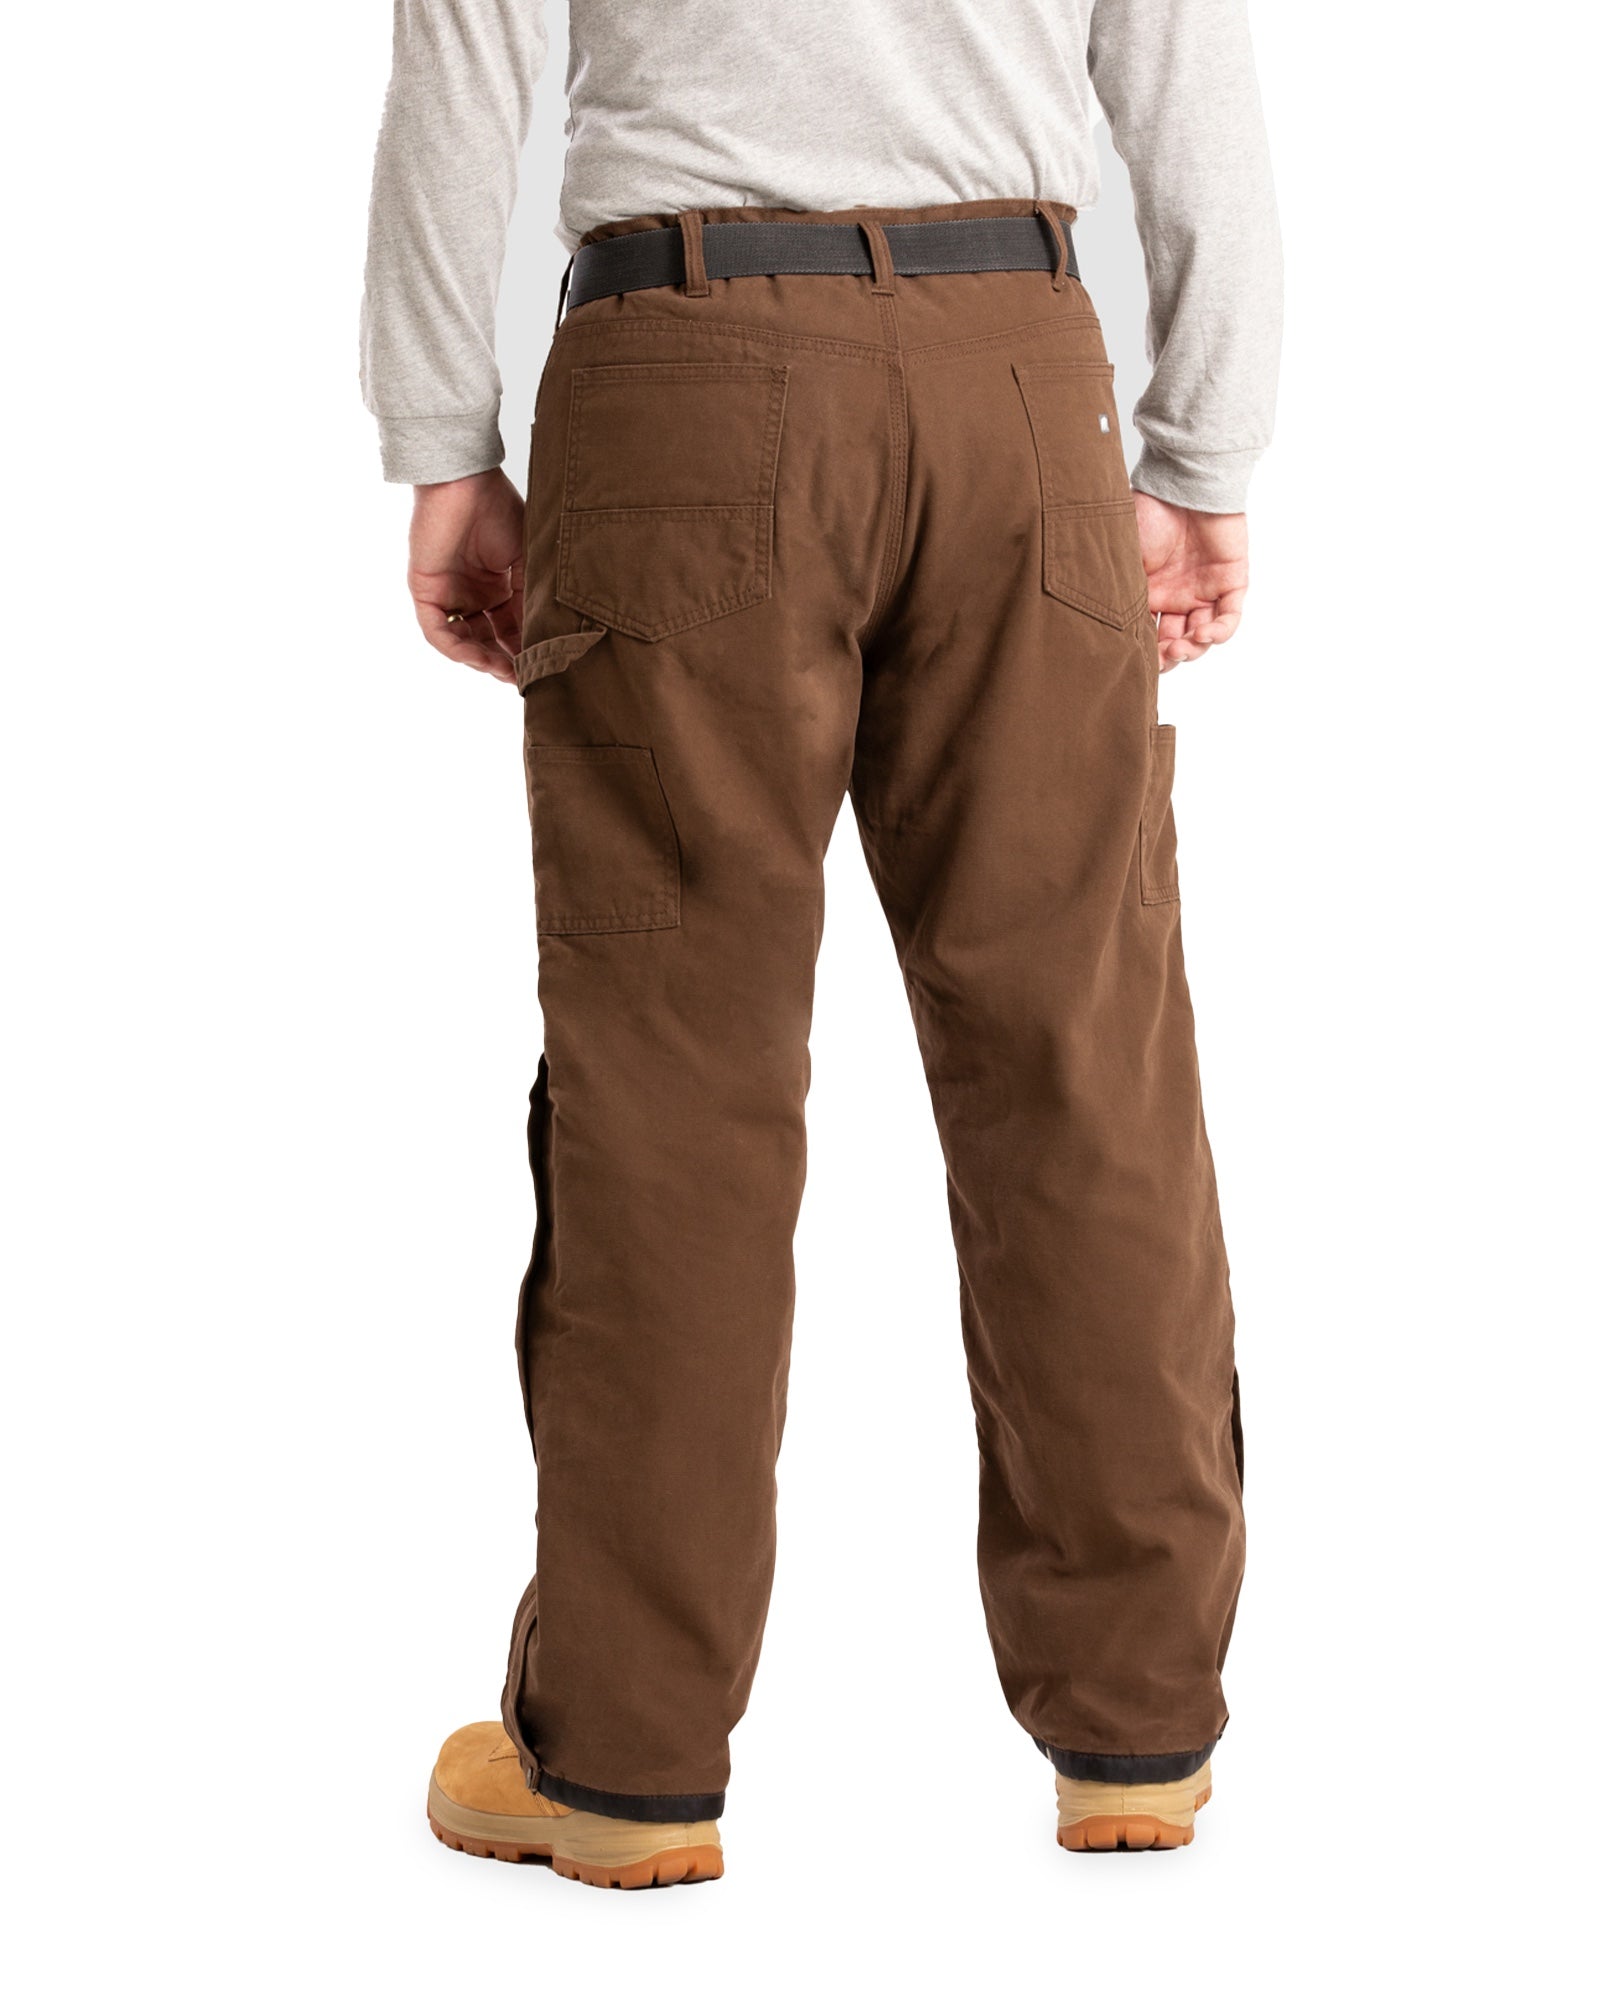 Highland Washed Duck Insulated Outer Pant